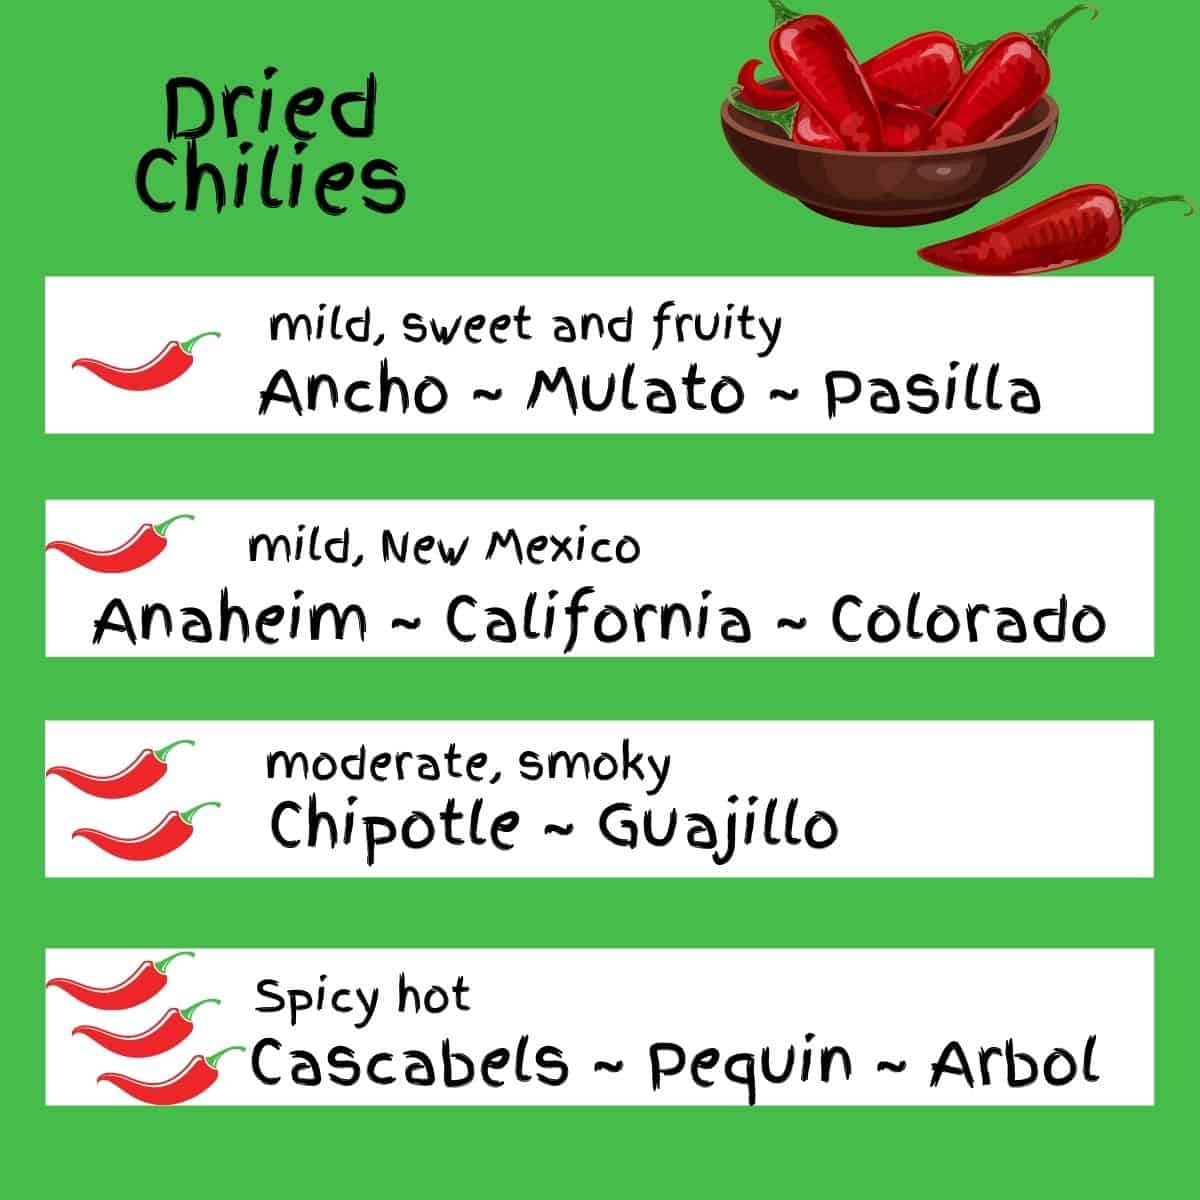 A chart with a guide to dried chilis.